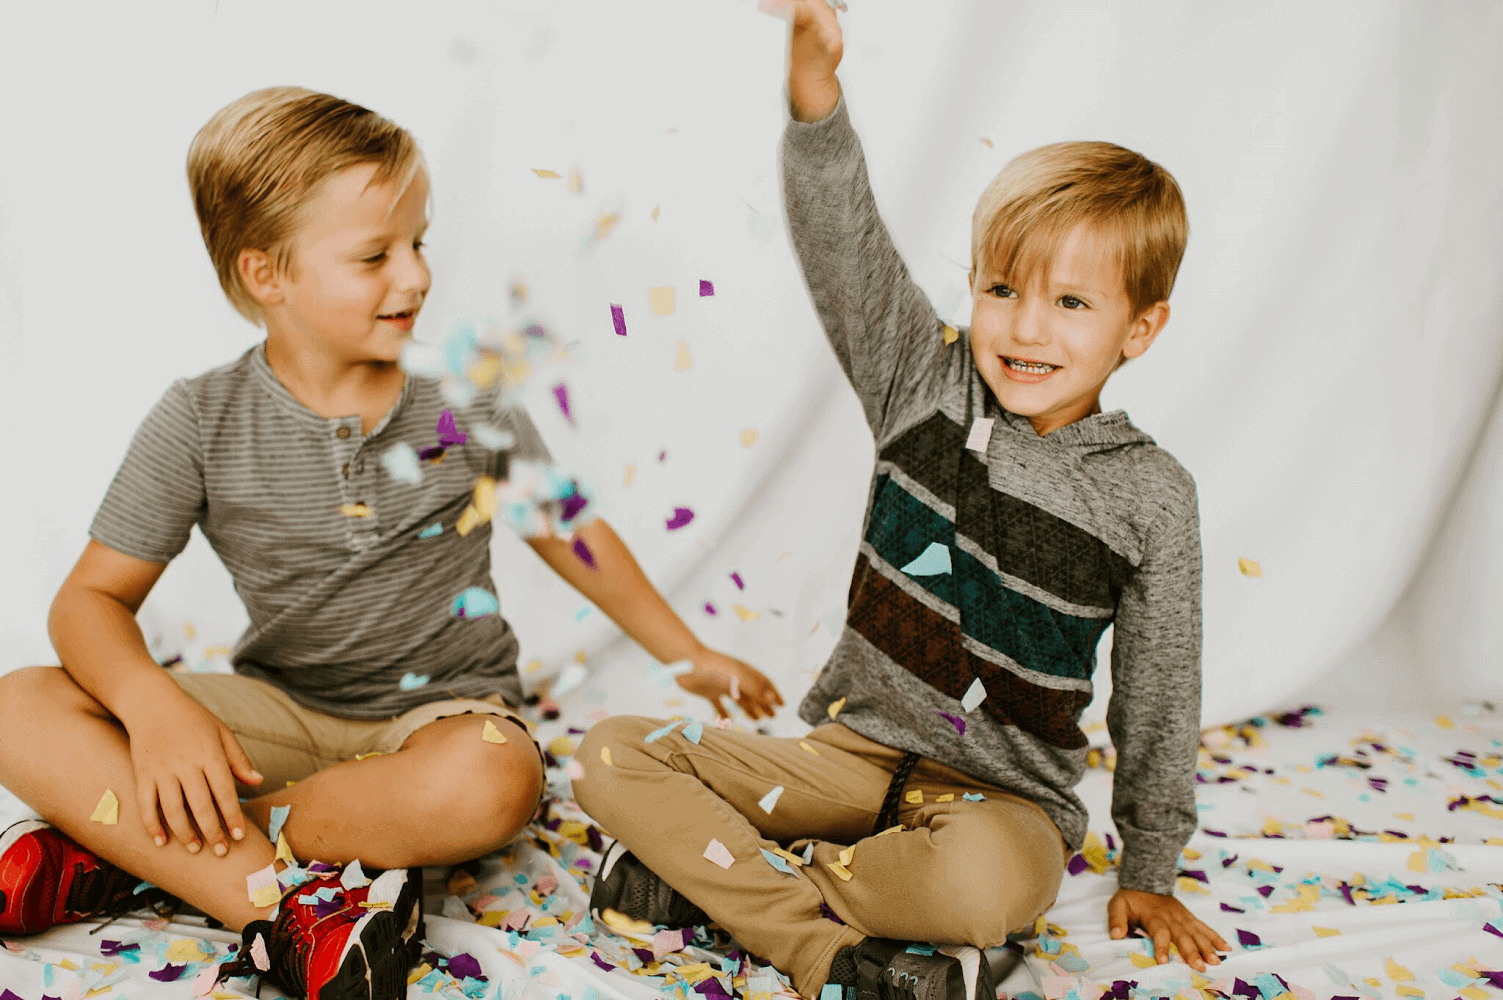 Jenna's two boys sitting on the floor smiling as confetti falls on them.